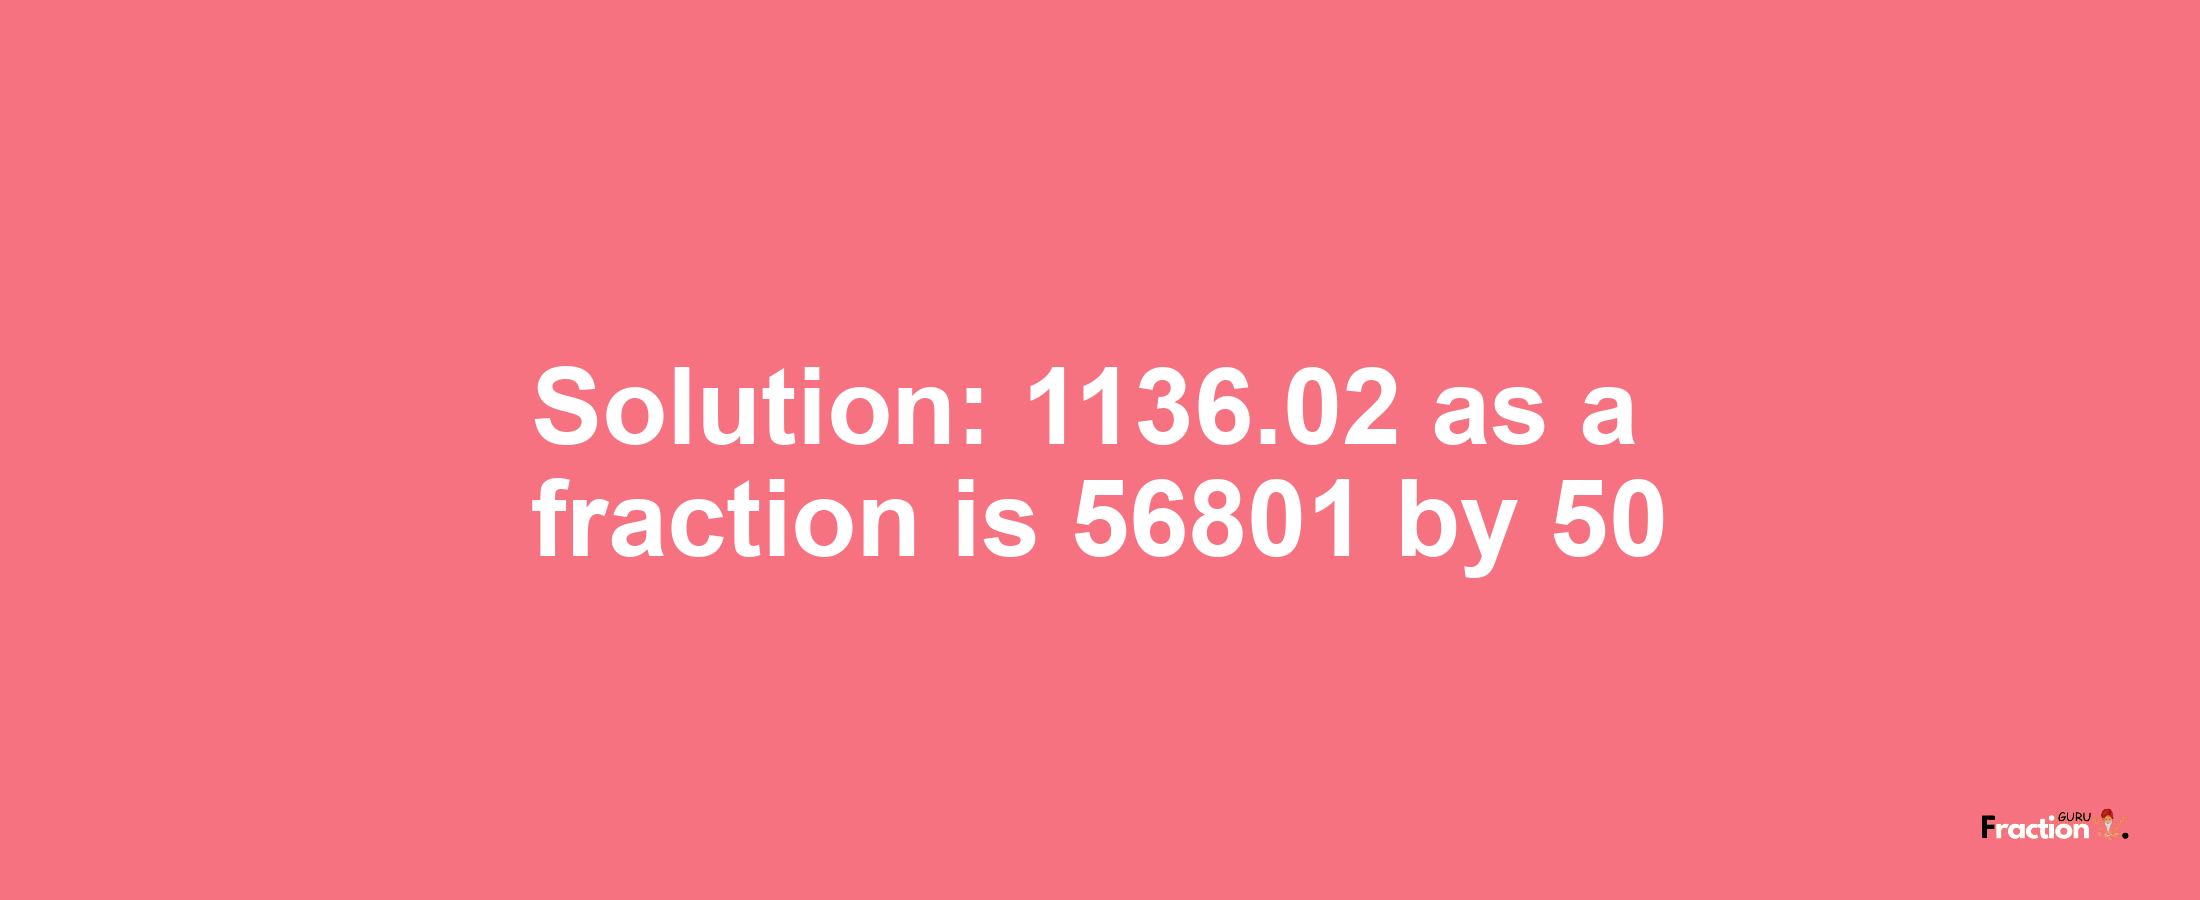 Solution:1136.02 as a fraction is 56801/50